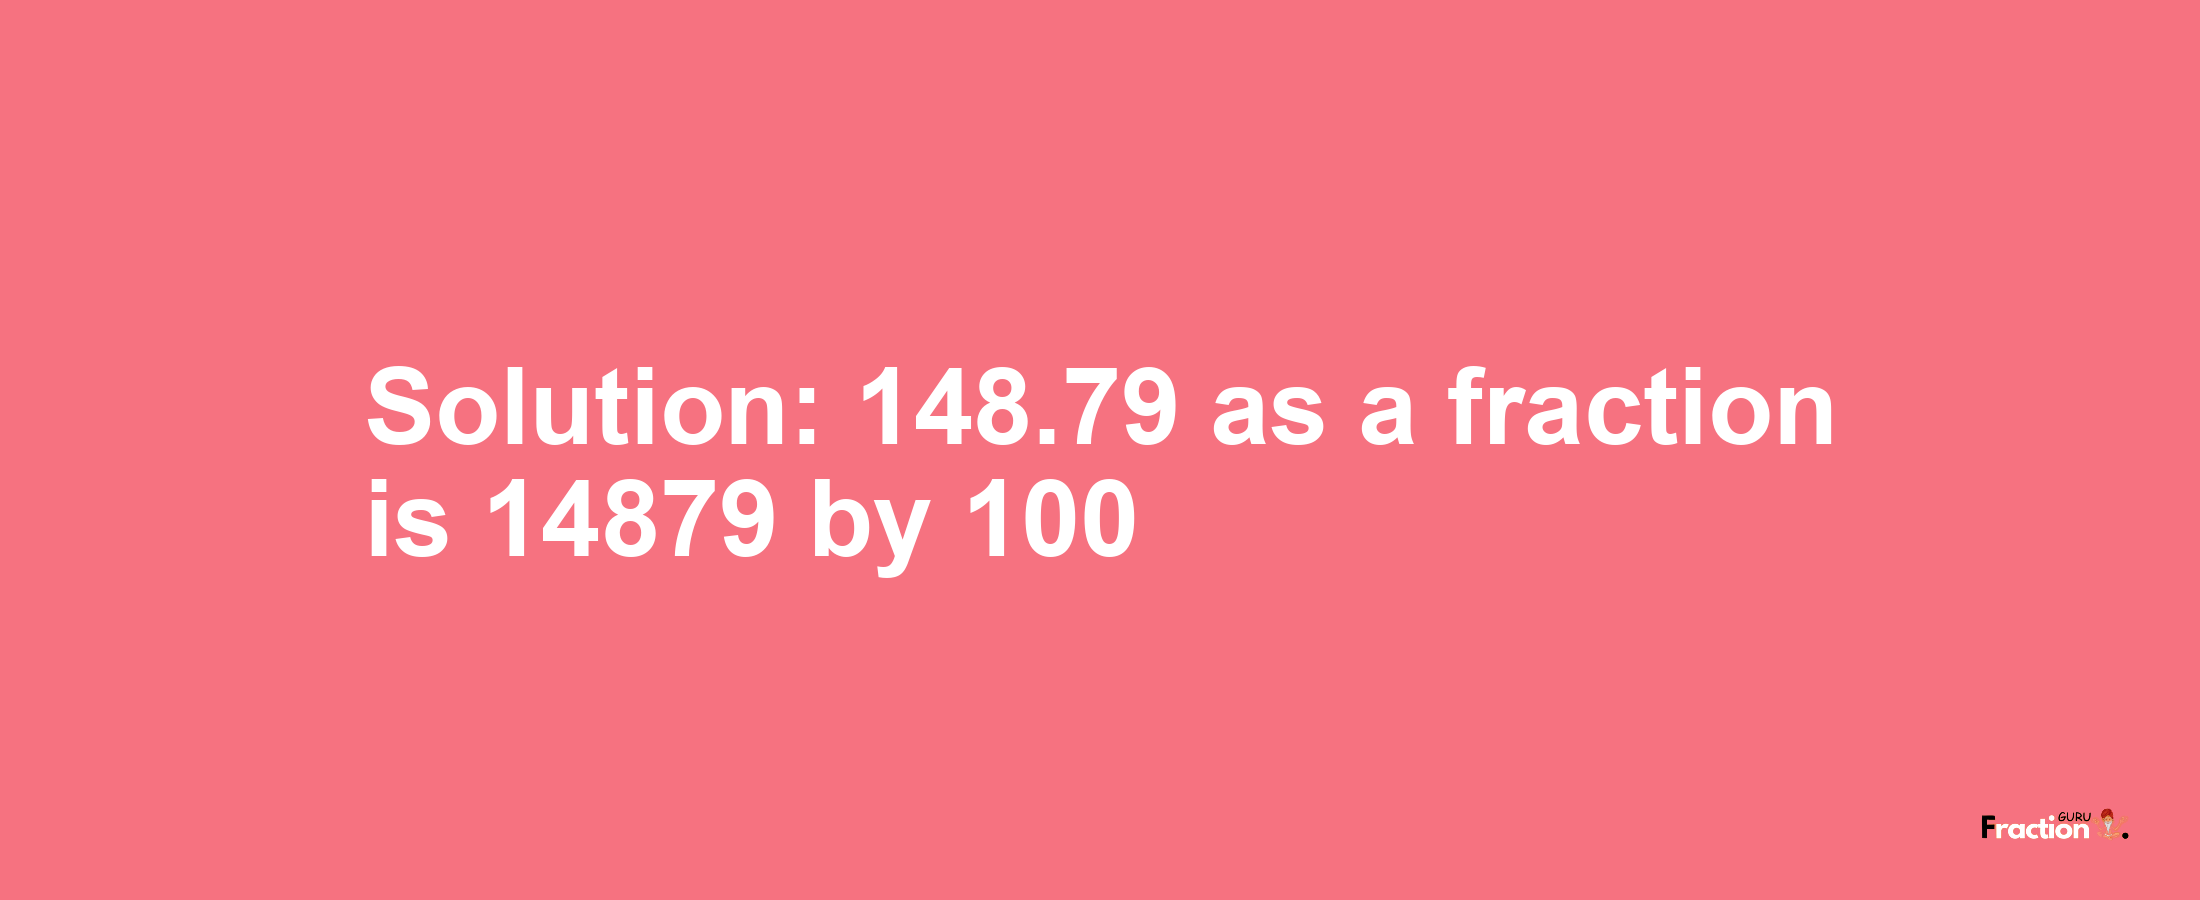 Solution:148.79 as a fraction is 14879/100